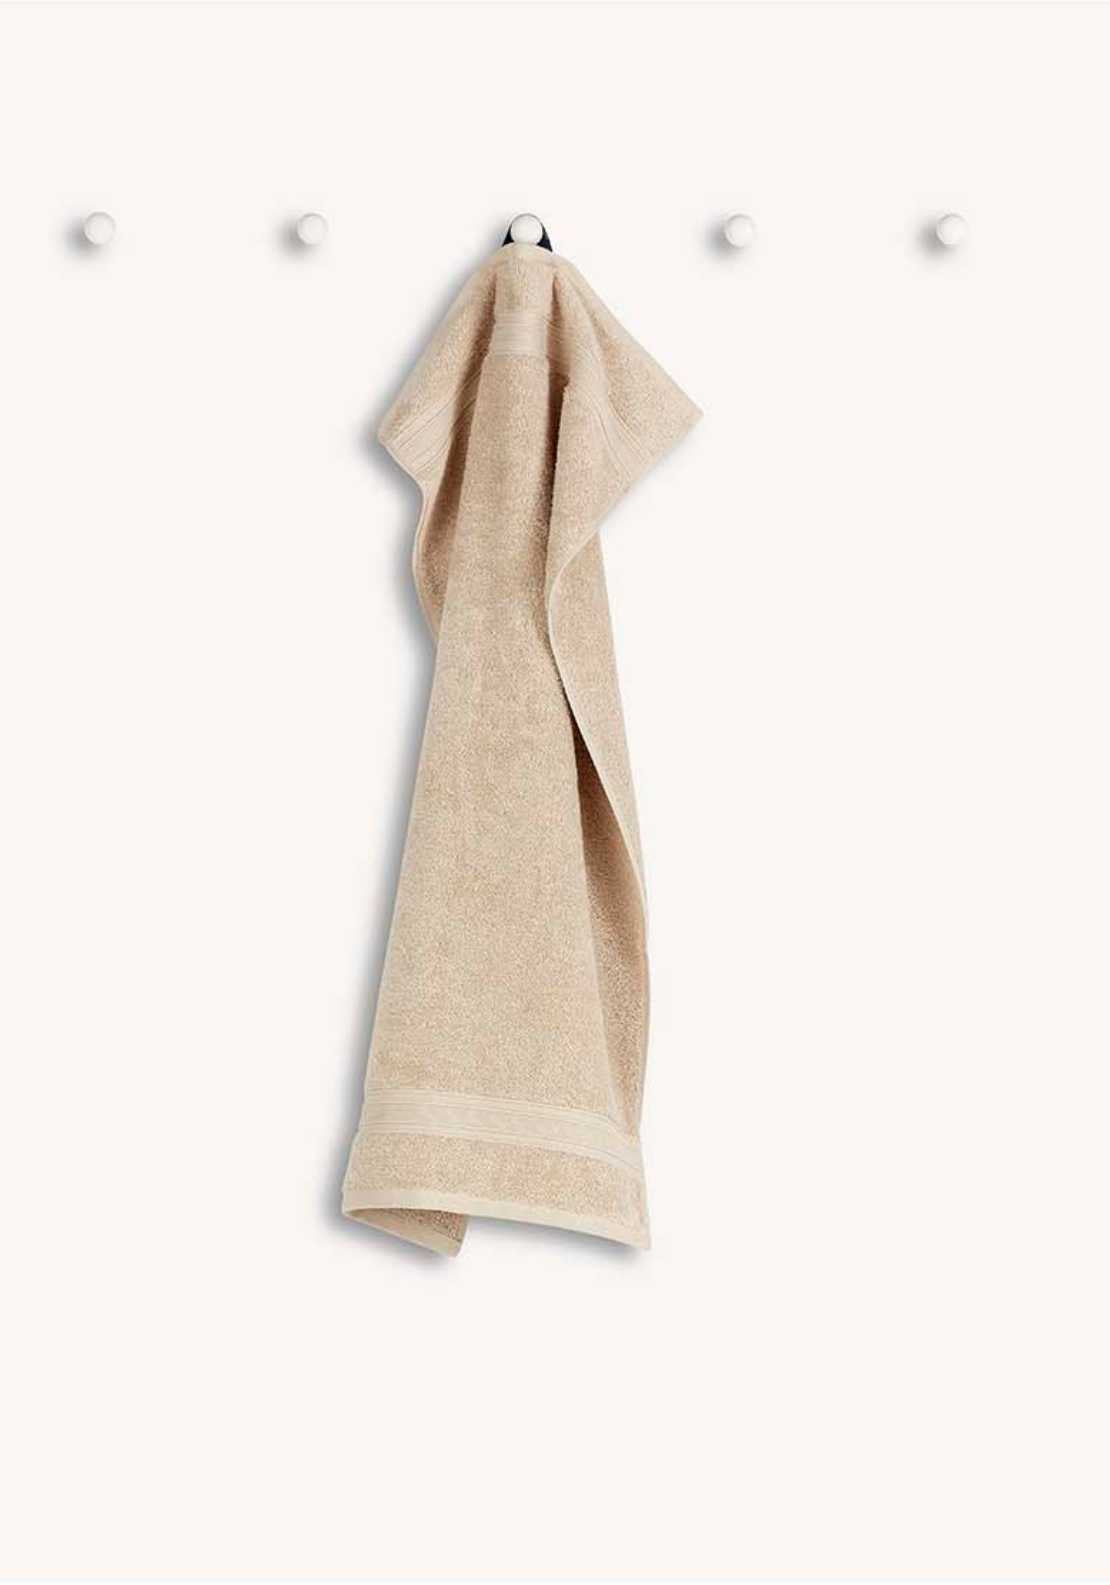 Christy Serene Hand Towel - Driftwood 2 Shaws Department Stores